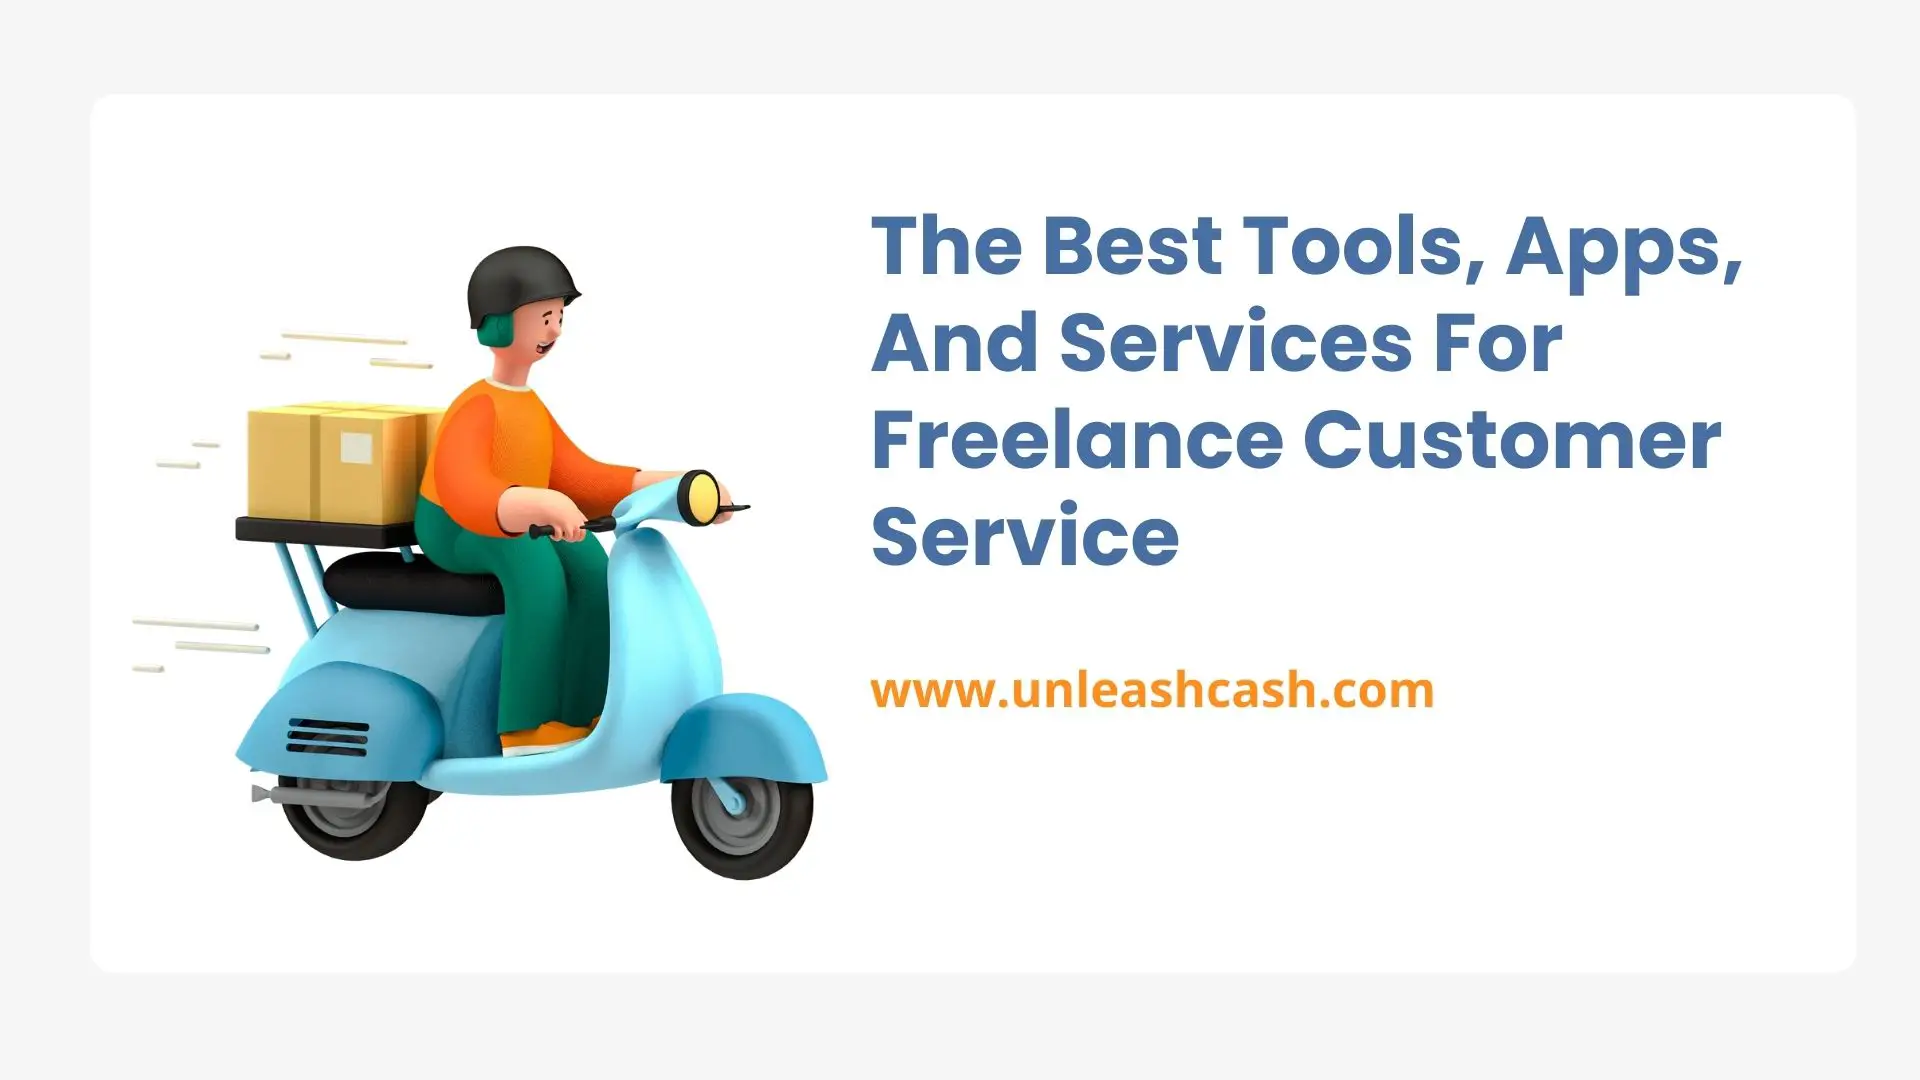 The Best Tools, Apps And Services For Freelance Customer Service